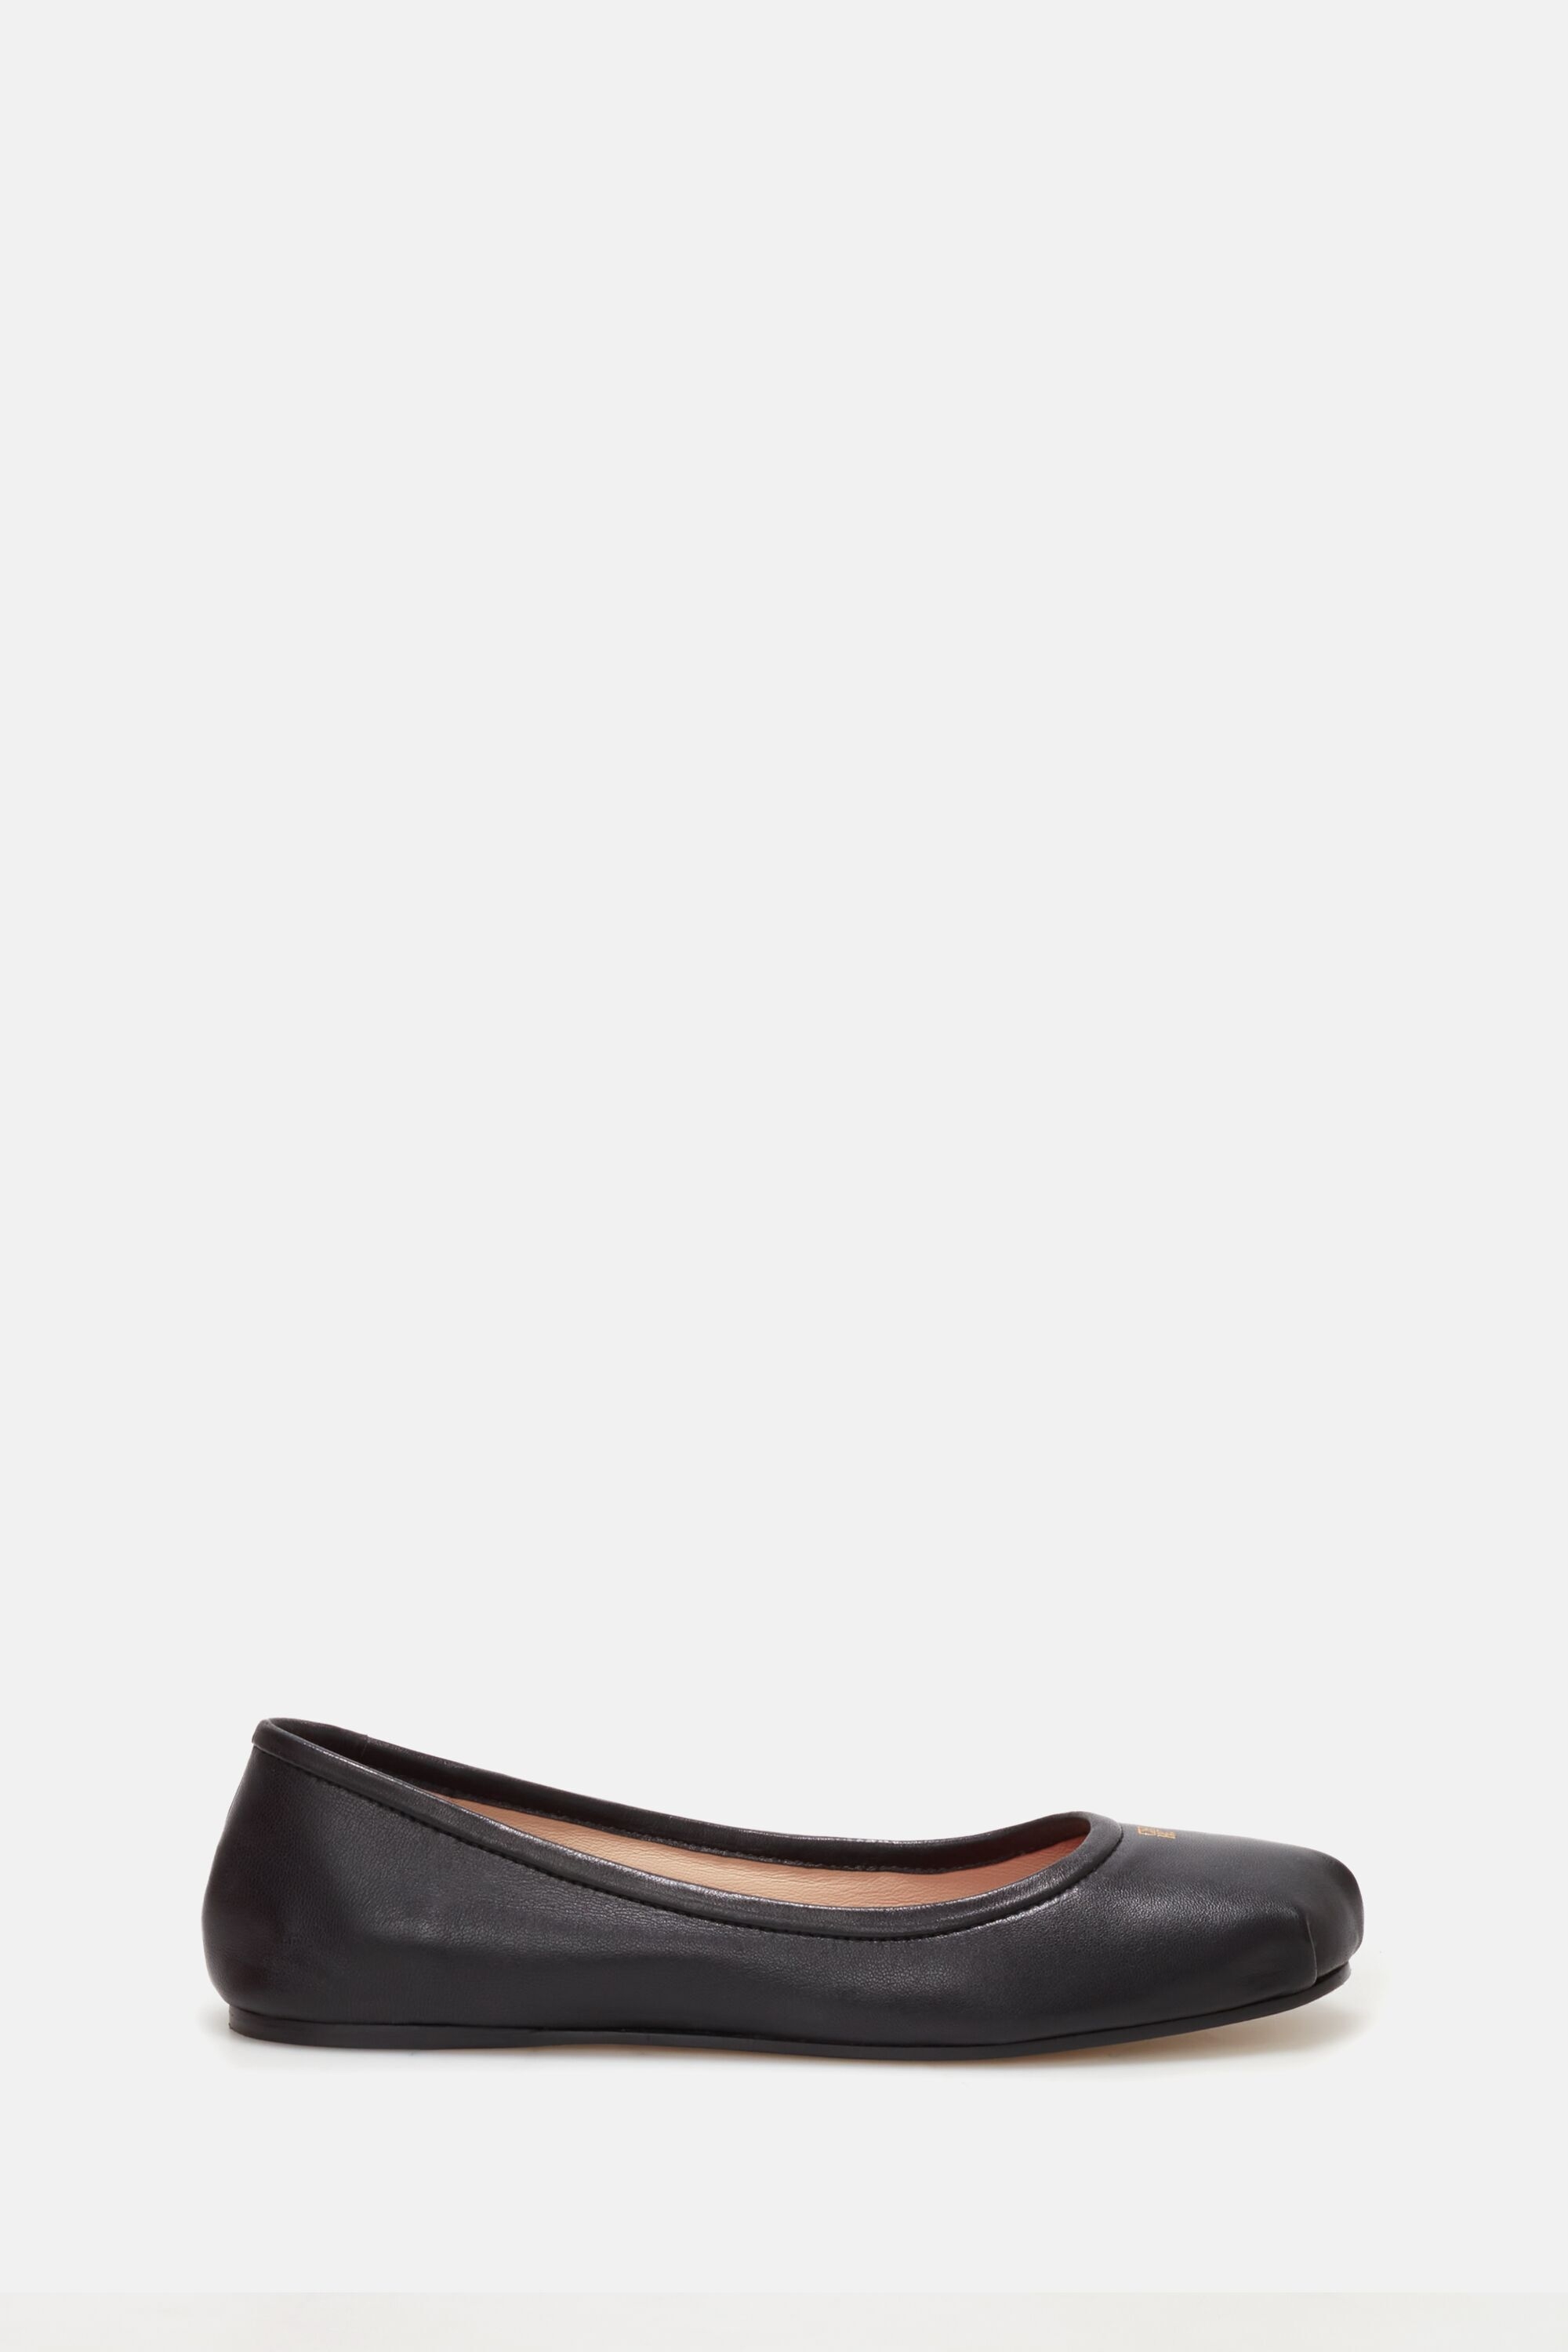 Soft CH leather ballet flats